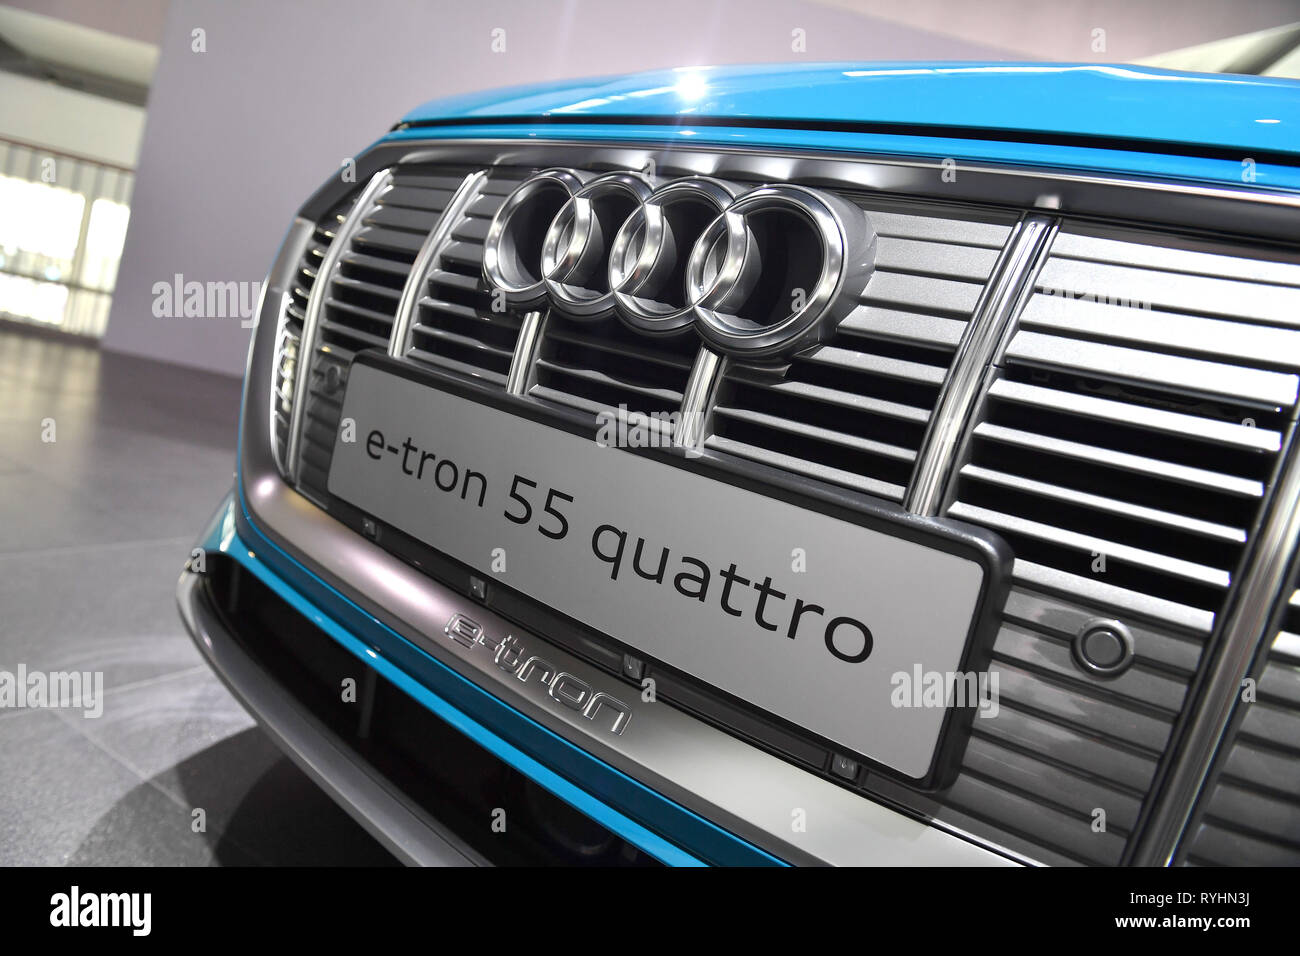 https://c8.alamy.com/comp/RYHN3J/front-end-radiator-grille-audi-e-tron-55-quattro-e-car-electric-car-annual-press-conference-2019-of-the-audi-ag-aktiengesellschaft-in-ingolstadt-on-14032019-usage-worldwide-RYHN3J.jpg